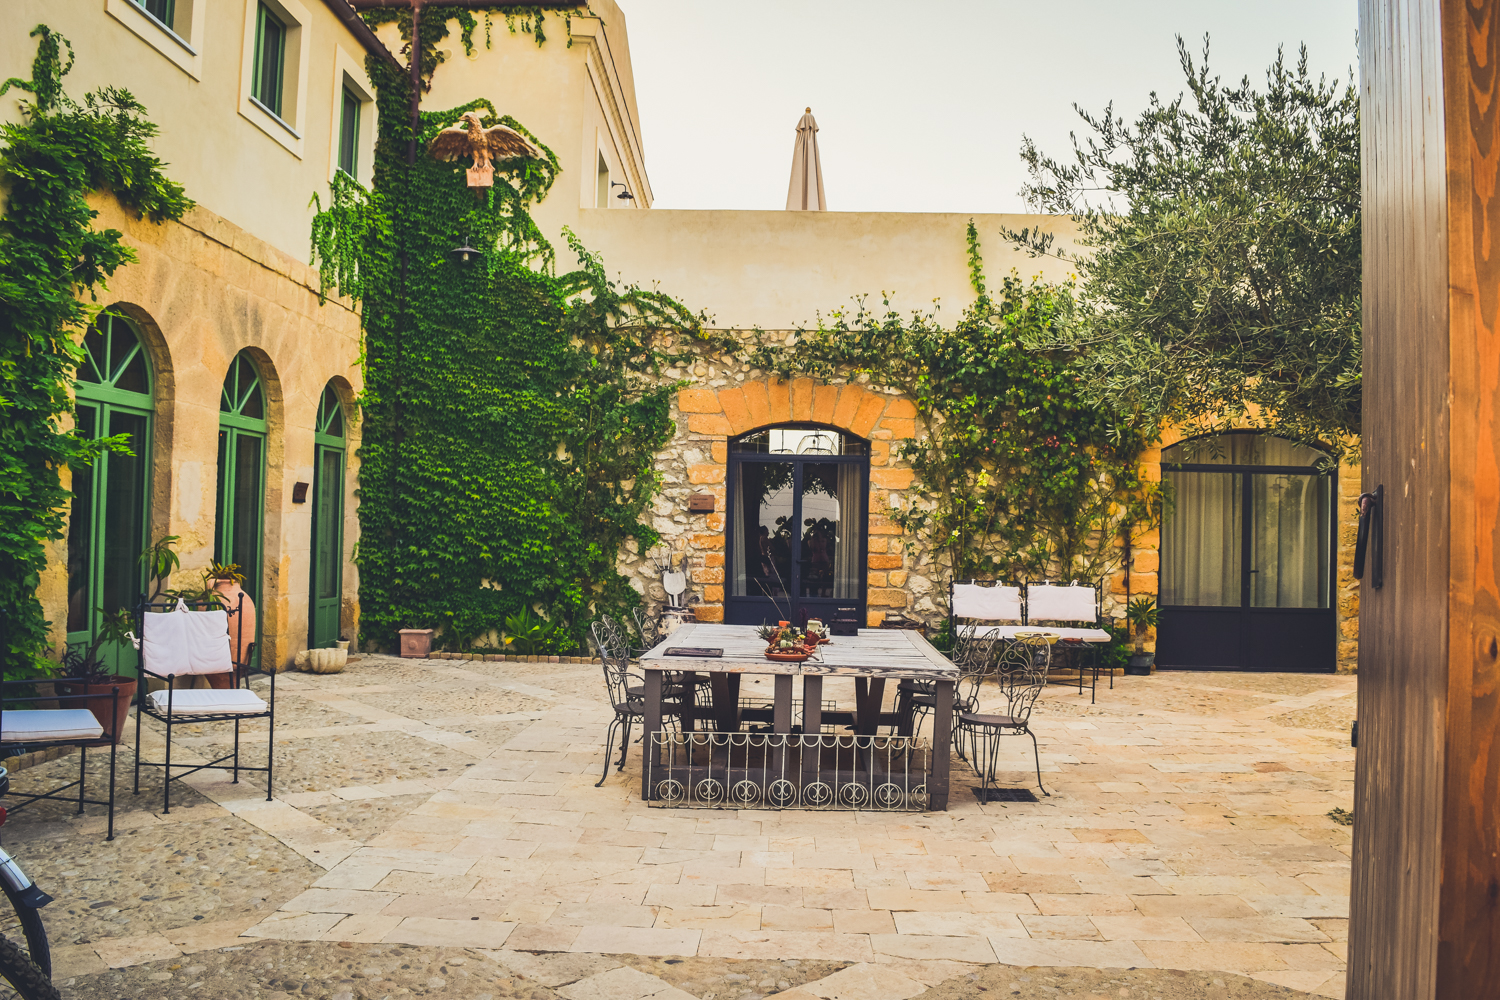 Travel guide to sicily fontes episcopi bio resort where to stay in sicily sicilia near agrigento italy-52 courtyard